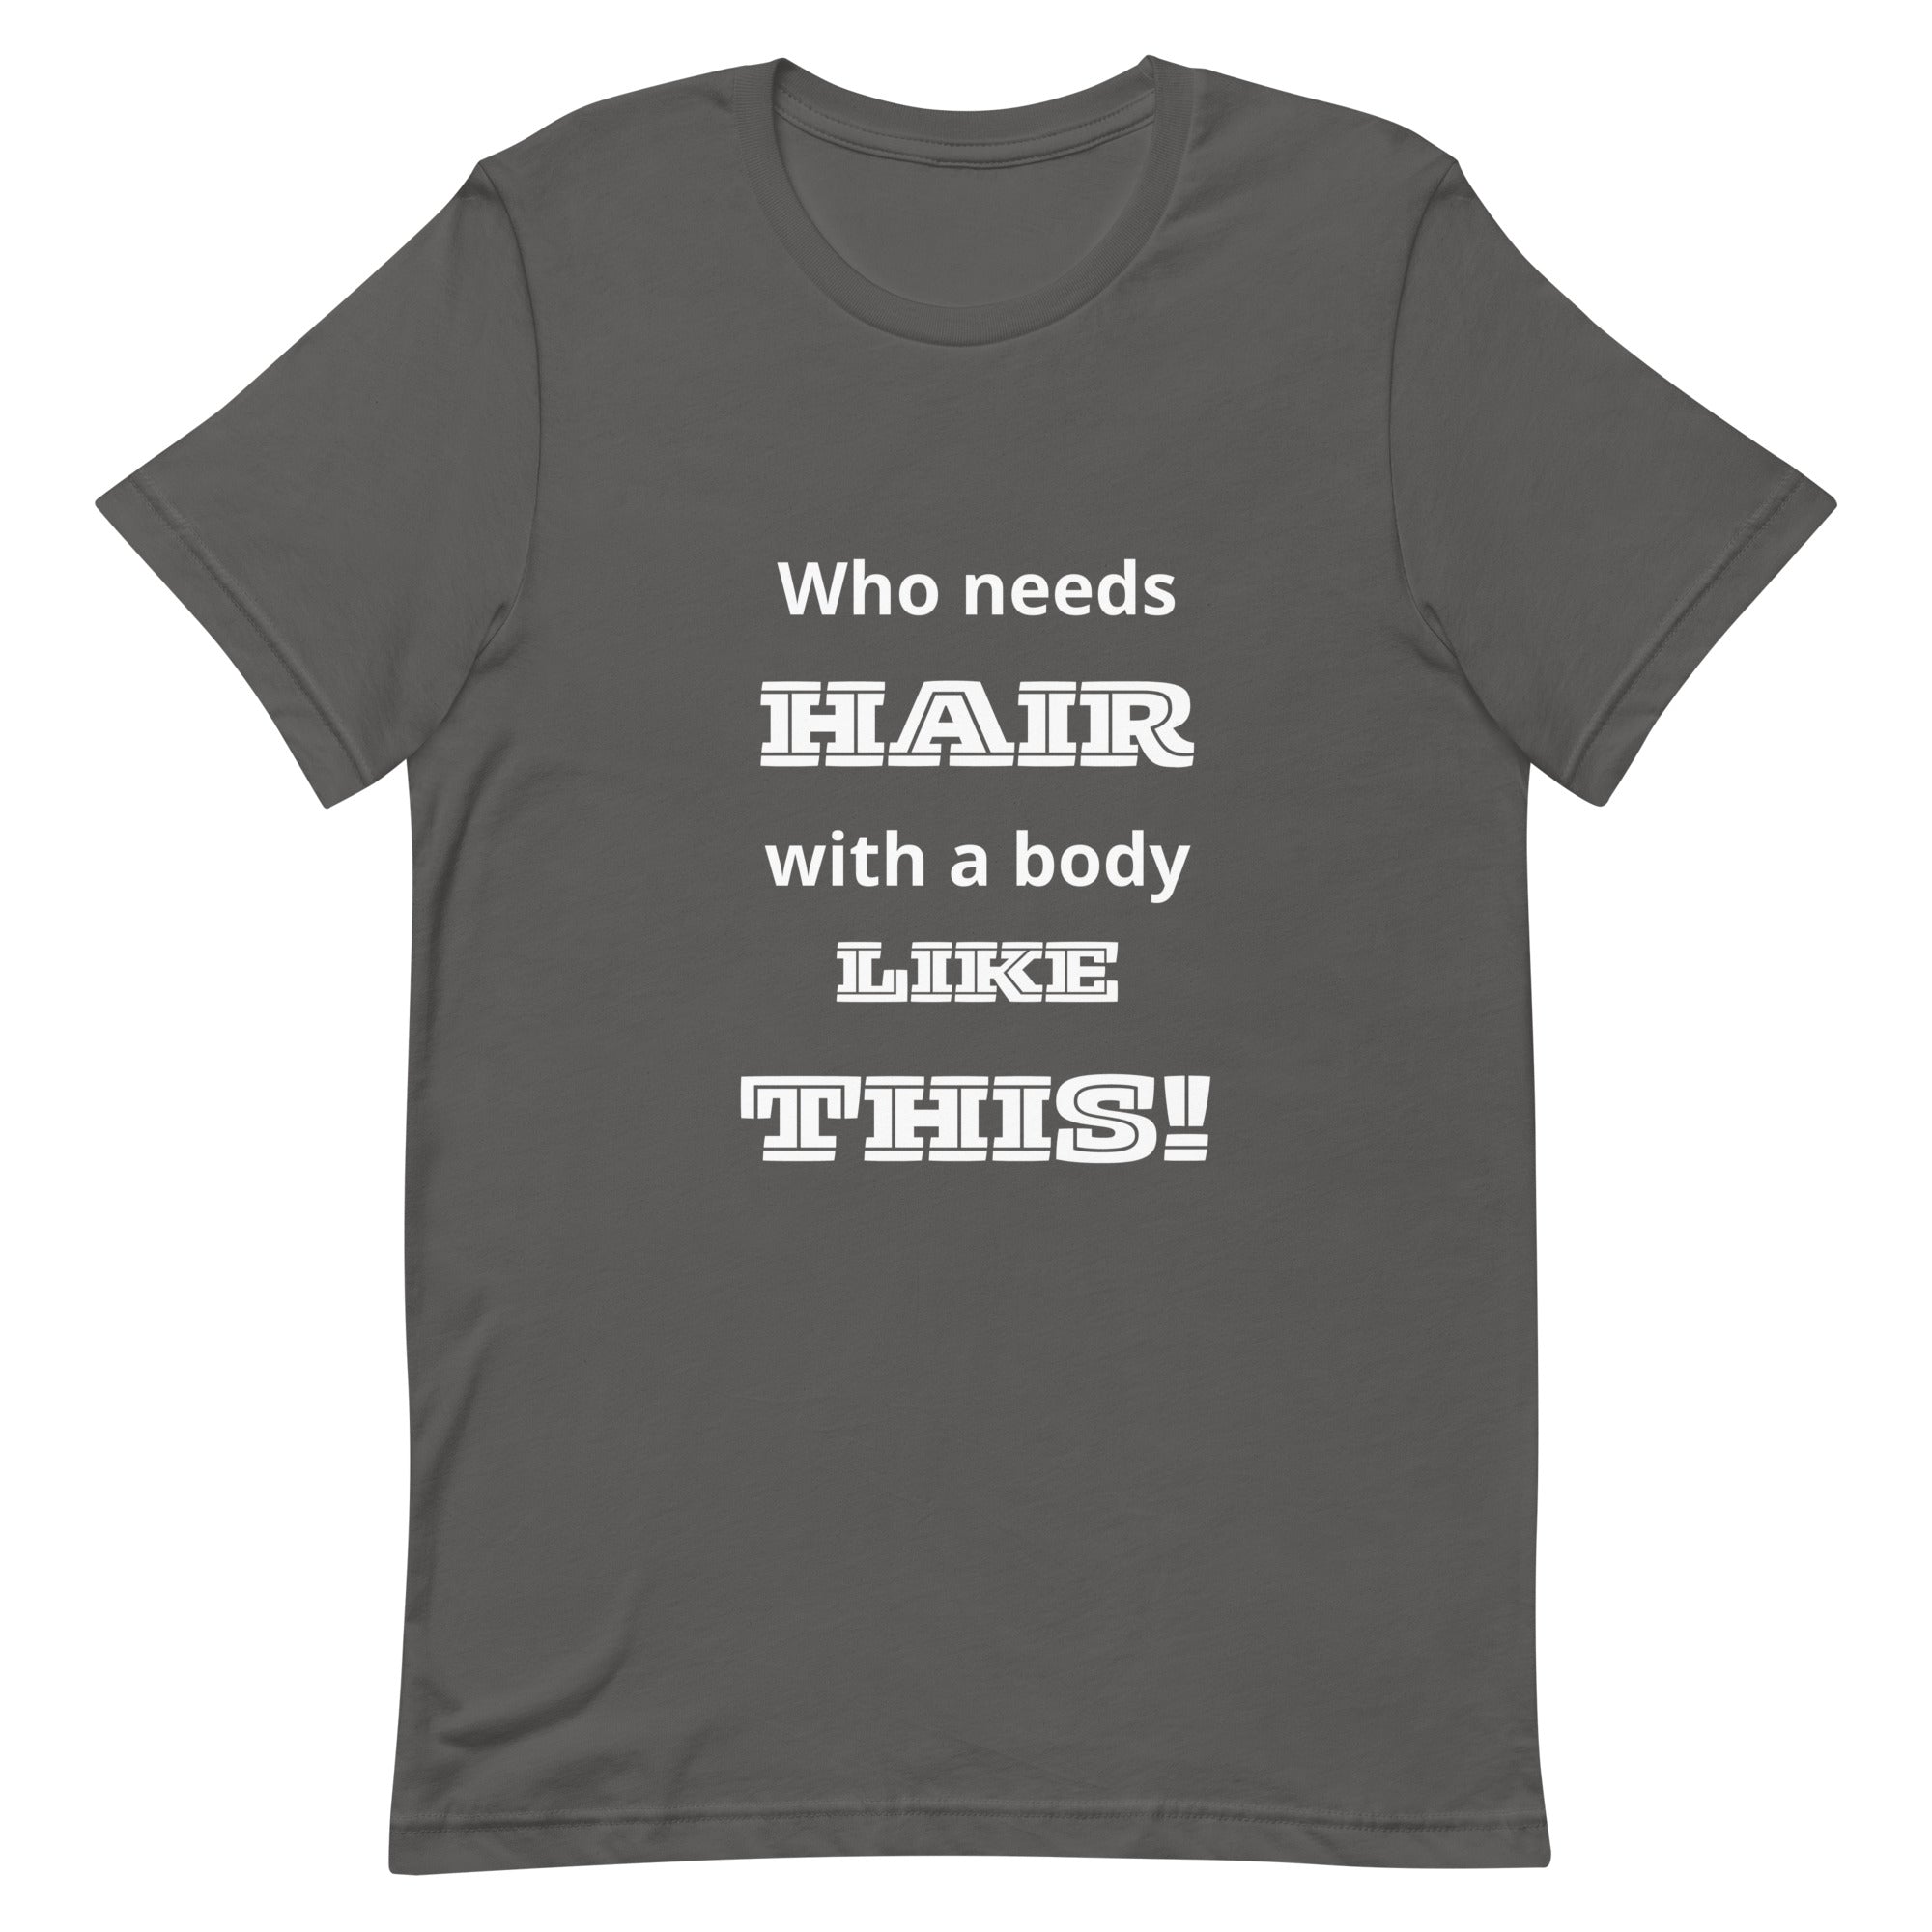 Who Need Hair With A Body Like This t-shirt